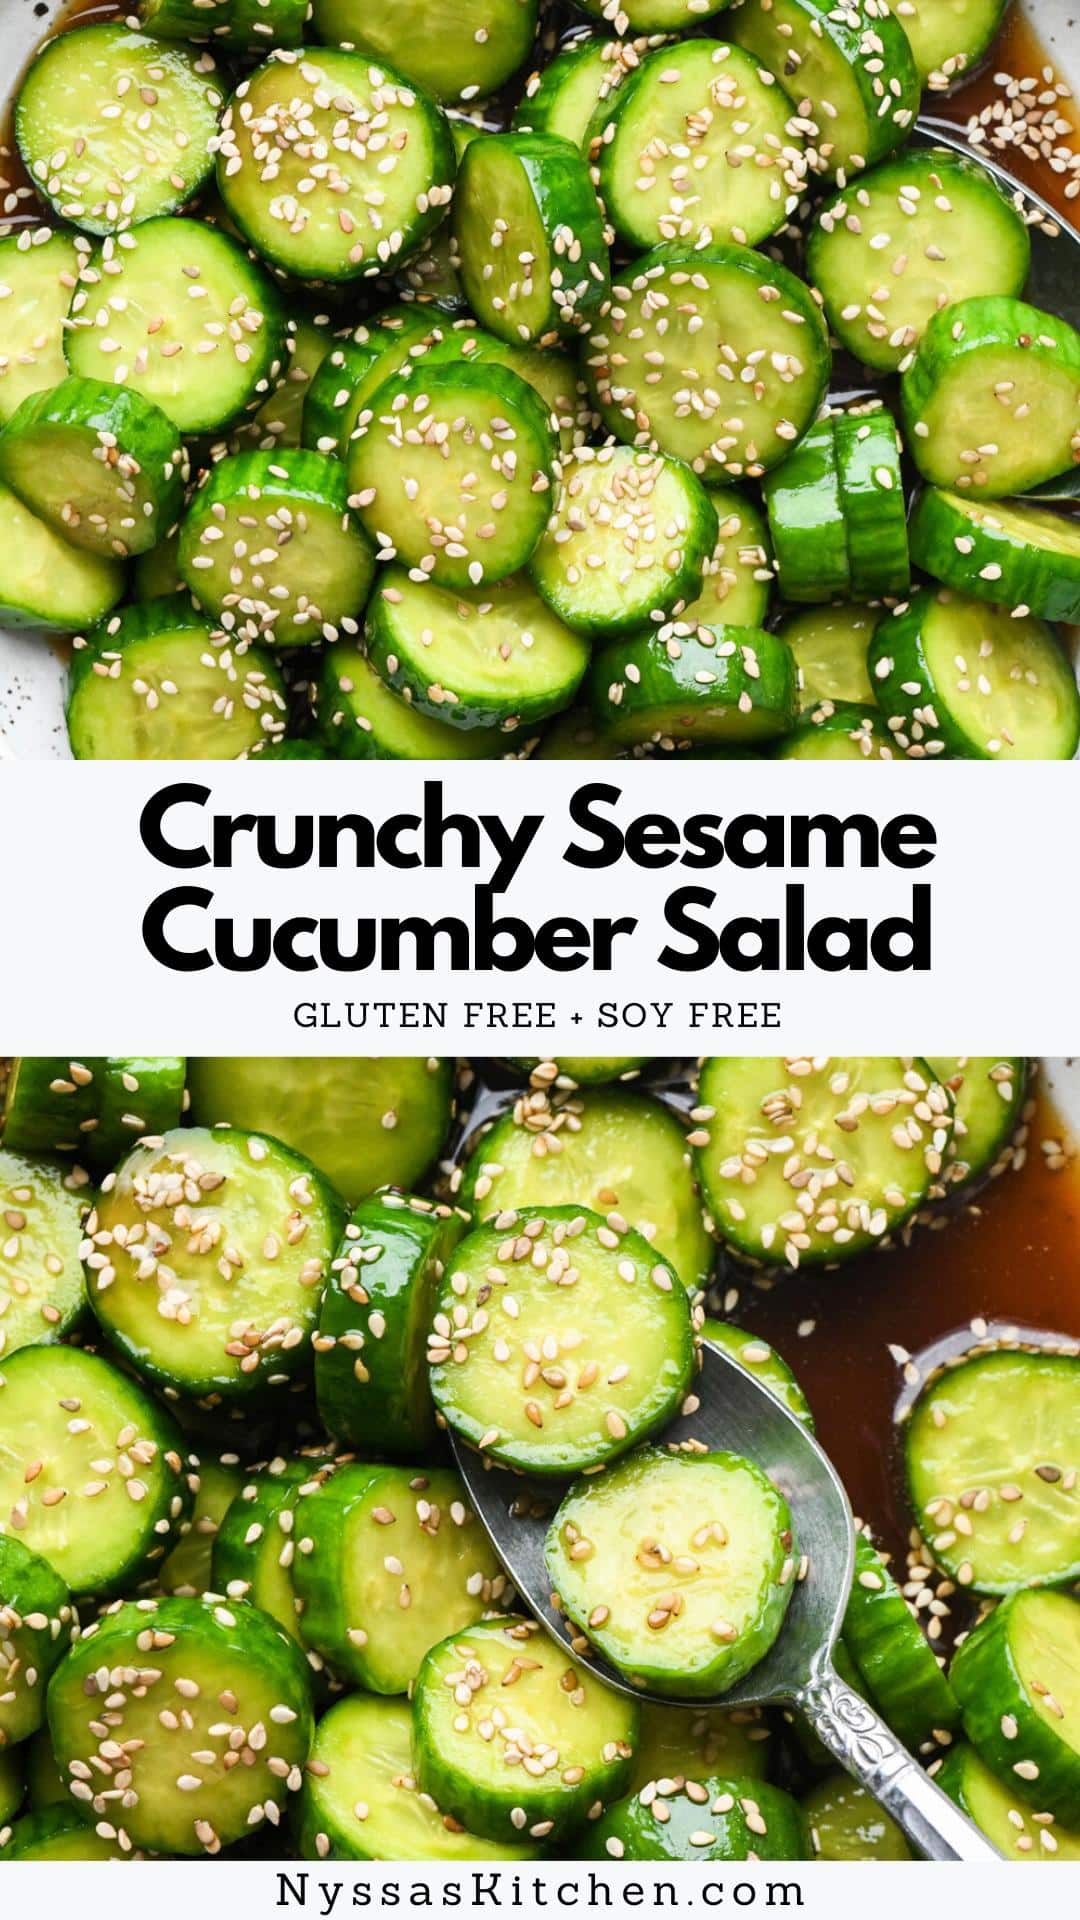 This crunchy sesame cucumber salad is an easy, refreshing side dish made with a simple sesame oil and rice vinegar dressing. Inspired by the Japanese dish sunomono, it has a crave-worthy crunchy texture, with light and well-balanced flavors that make the perfect pairing for many Asian meals. Our version is made using coconut aminos instead of soy sauce (though you could use either), is gluten free, and naturally sweetened.